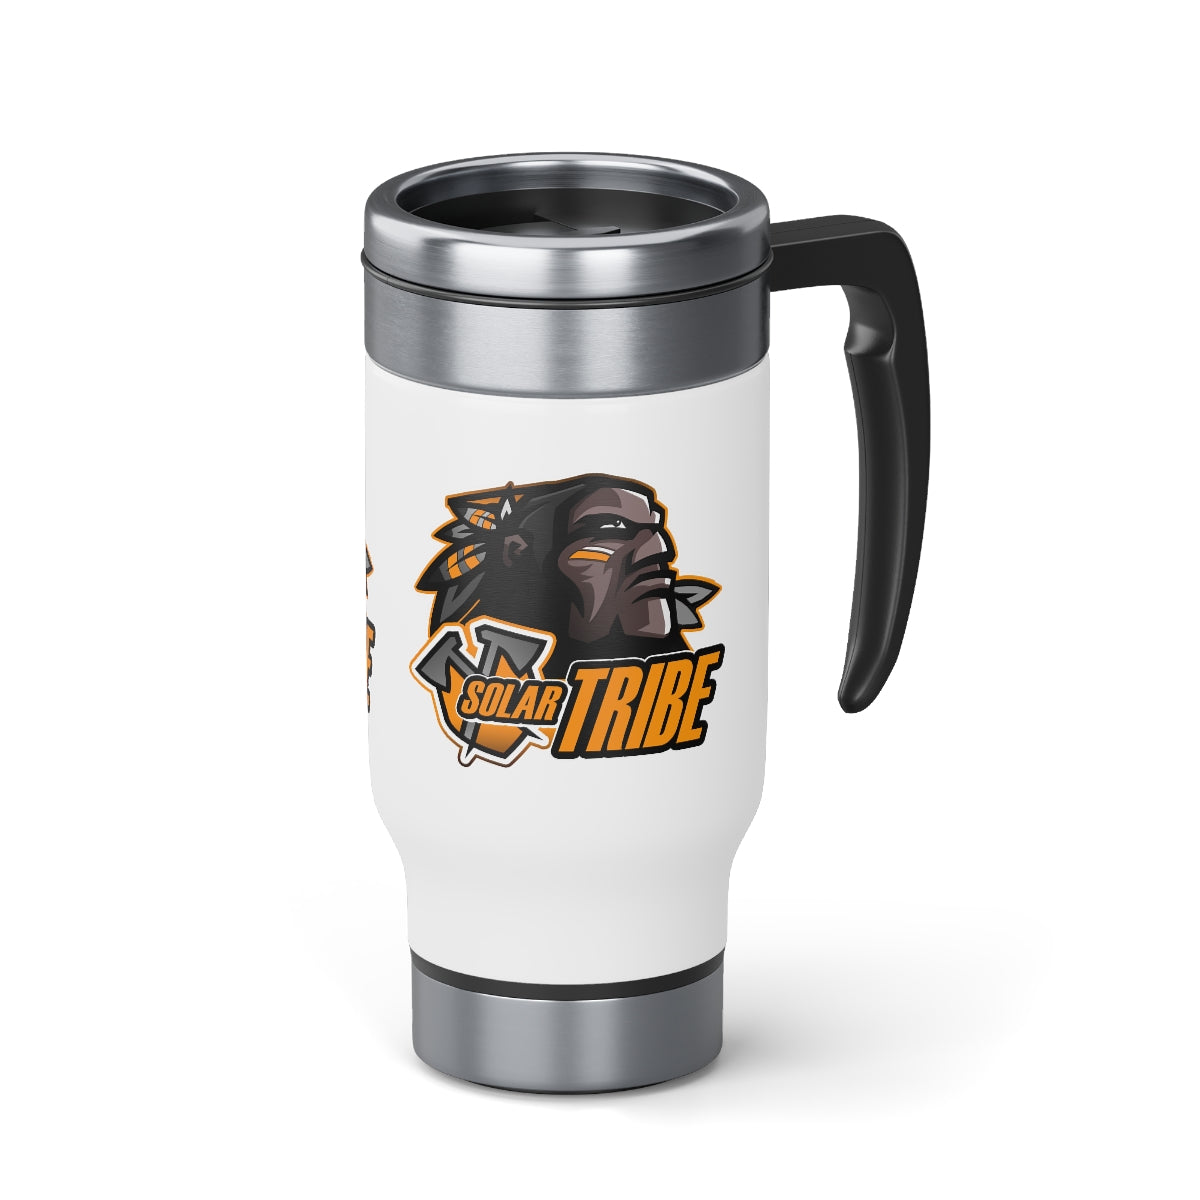 Solar Tribe  Stainless Steel Travel Mug with Handle, 14oz